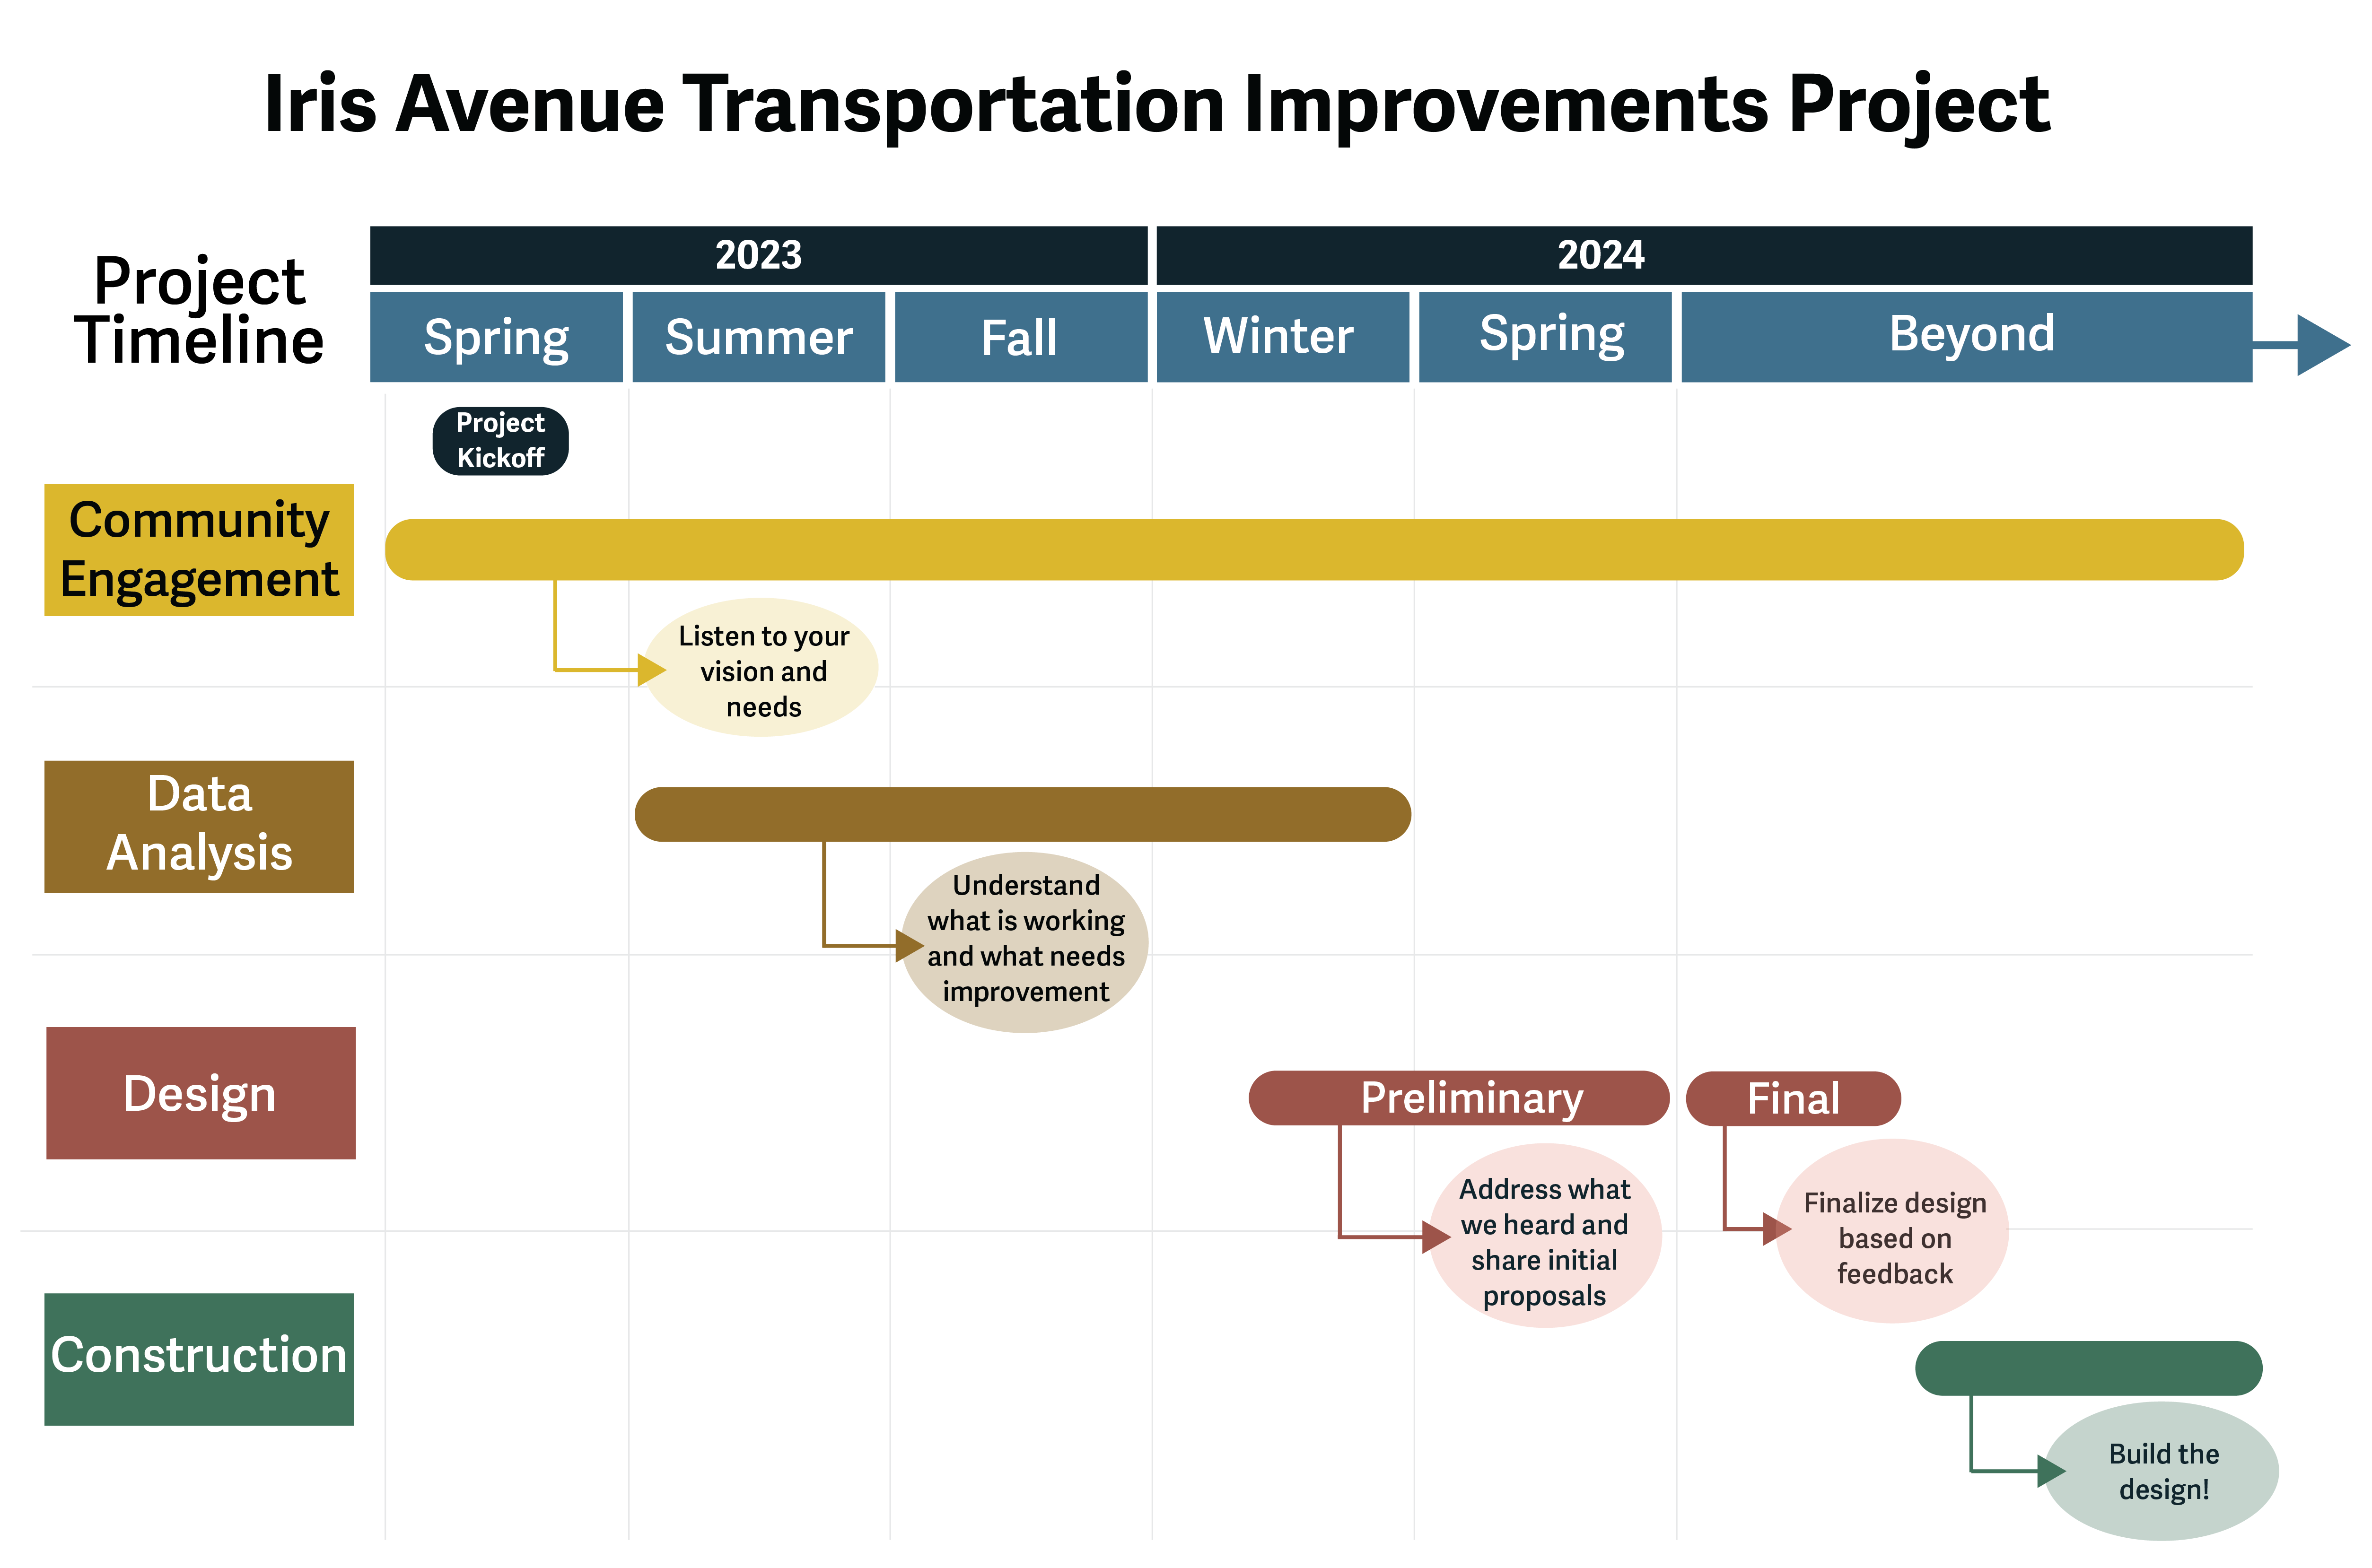 A graphic representation of the project timeline.